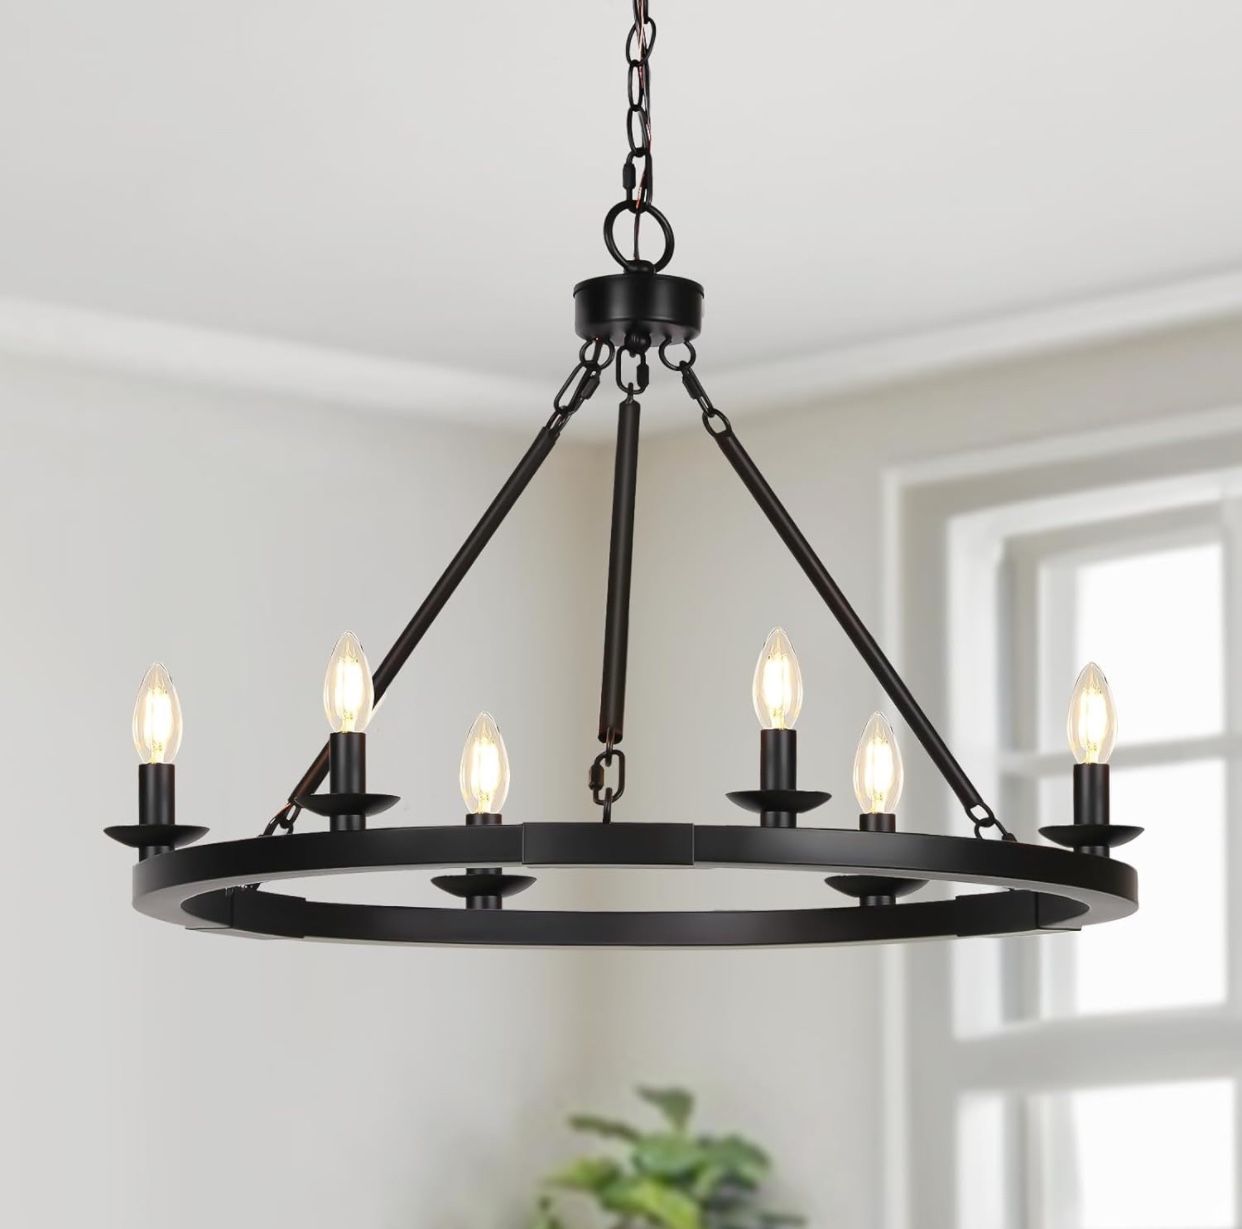 Black Farmhouse Chandelier, 6-Light Wagon Wheel Chandelier with Adjustable Height, Dining Room Light Fixture, Hanging Lights for Kitchen Island, Livin